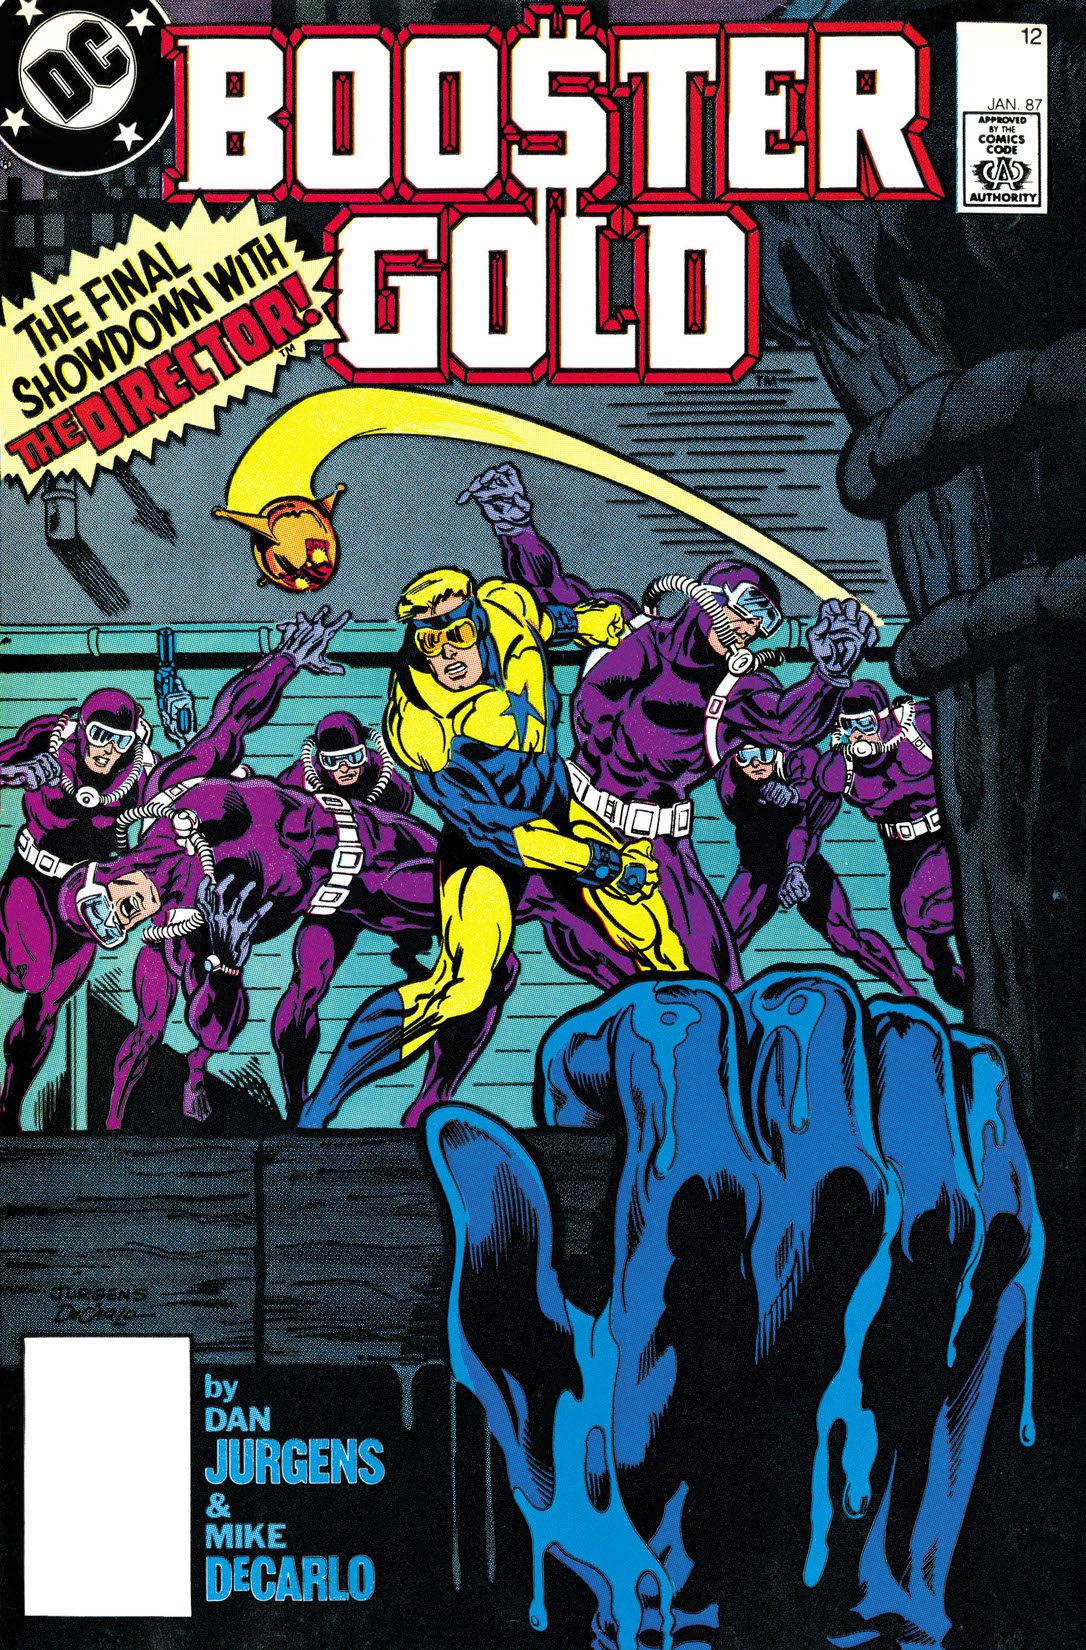 Booster Gold (1985-) #12 preview images